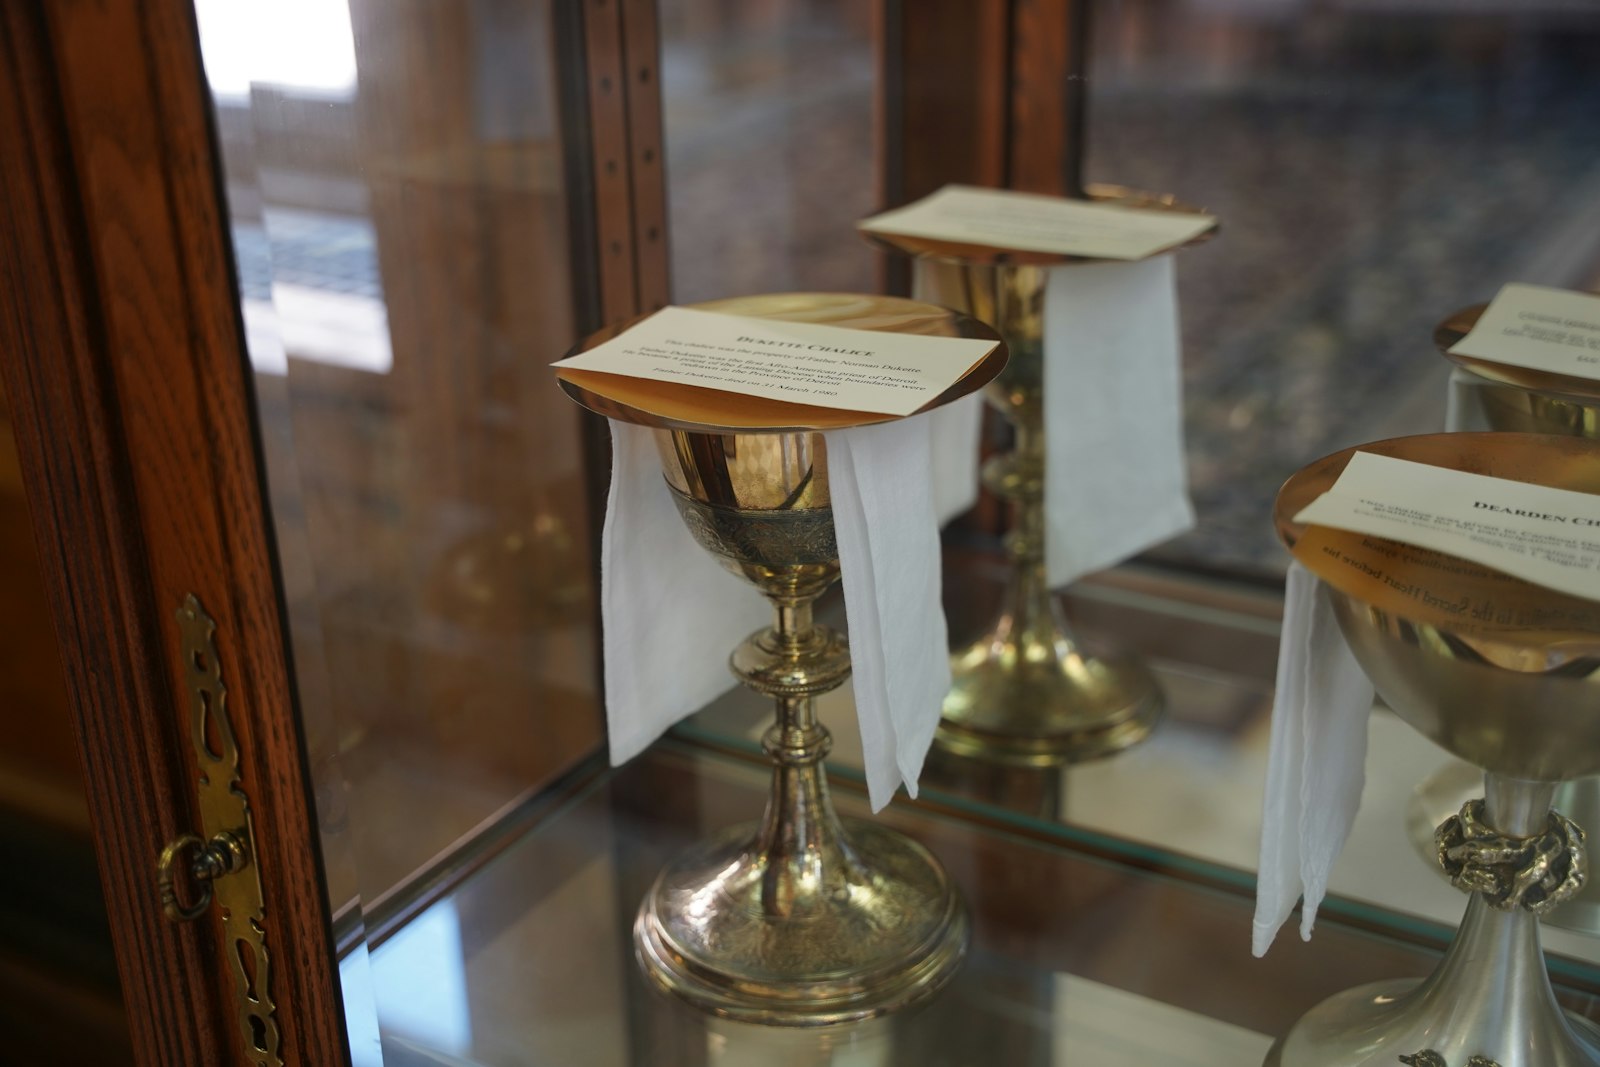 Fr. Norman DuKette's chalice is pictured on display at Sacred Heart Major Seminary among other historical artifacts. (Daniel Meloy | Detroit Catholic)